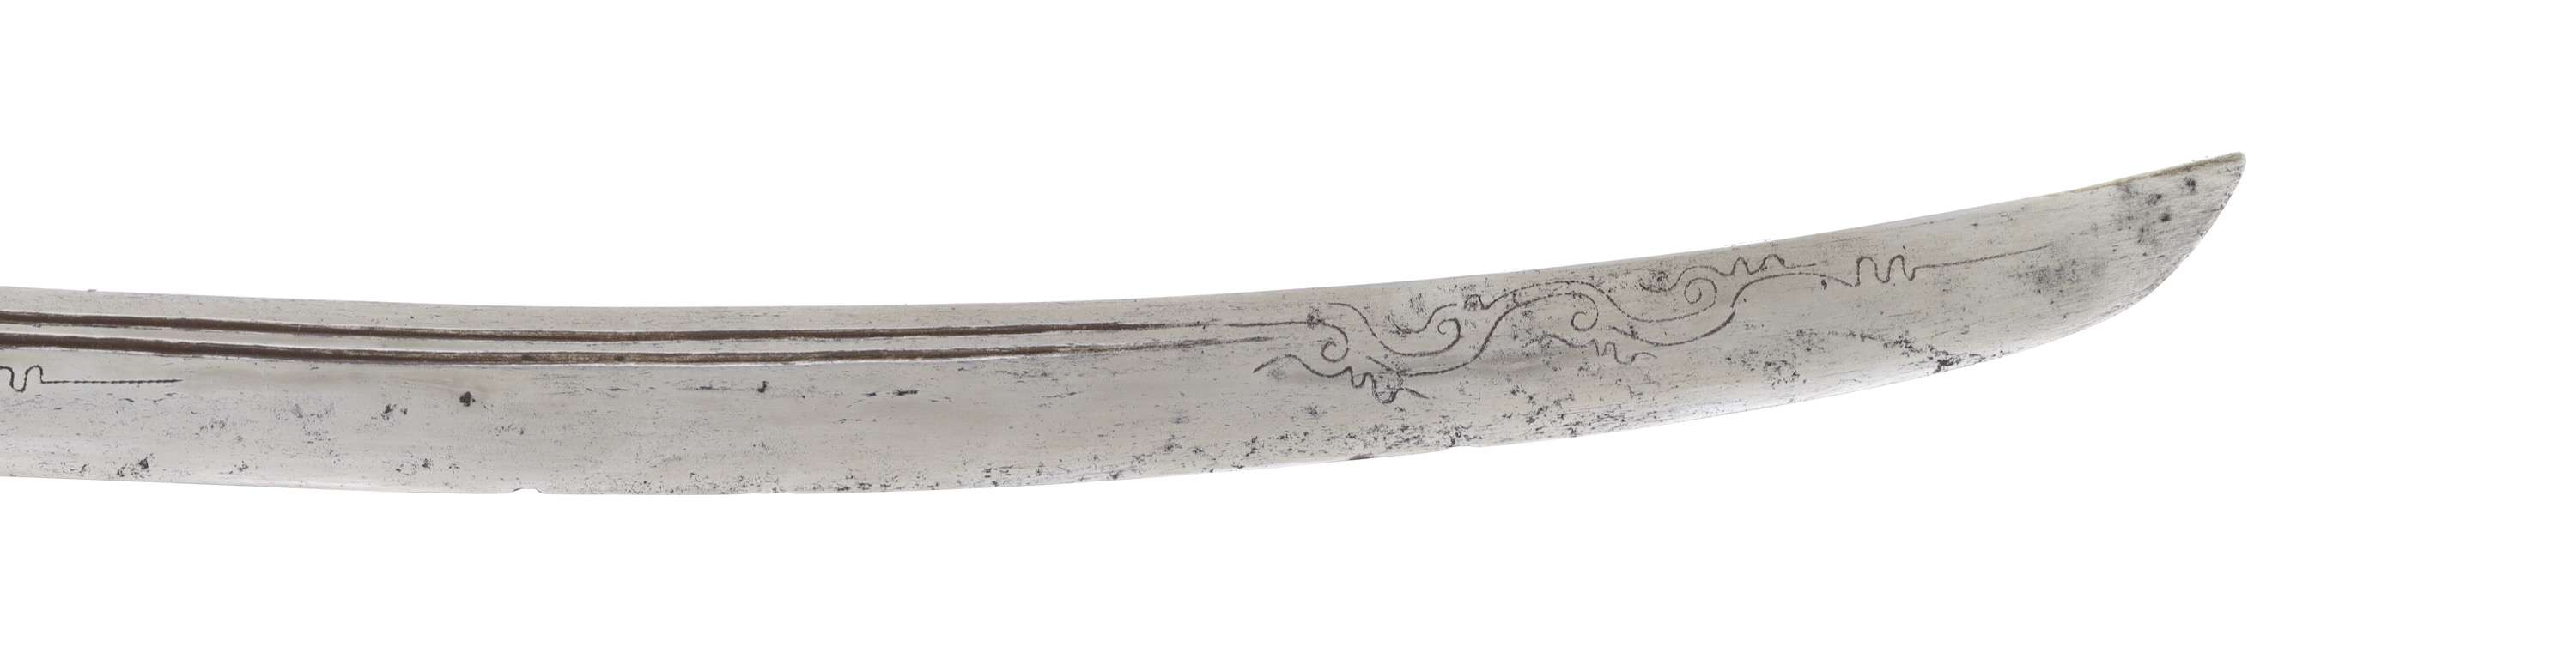 Tonkinese saber collected 1885-1887